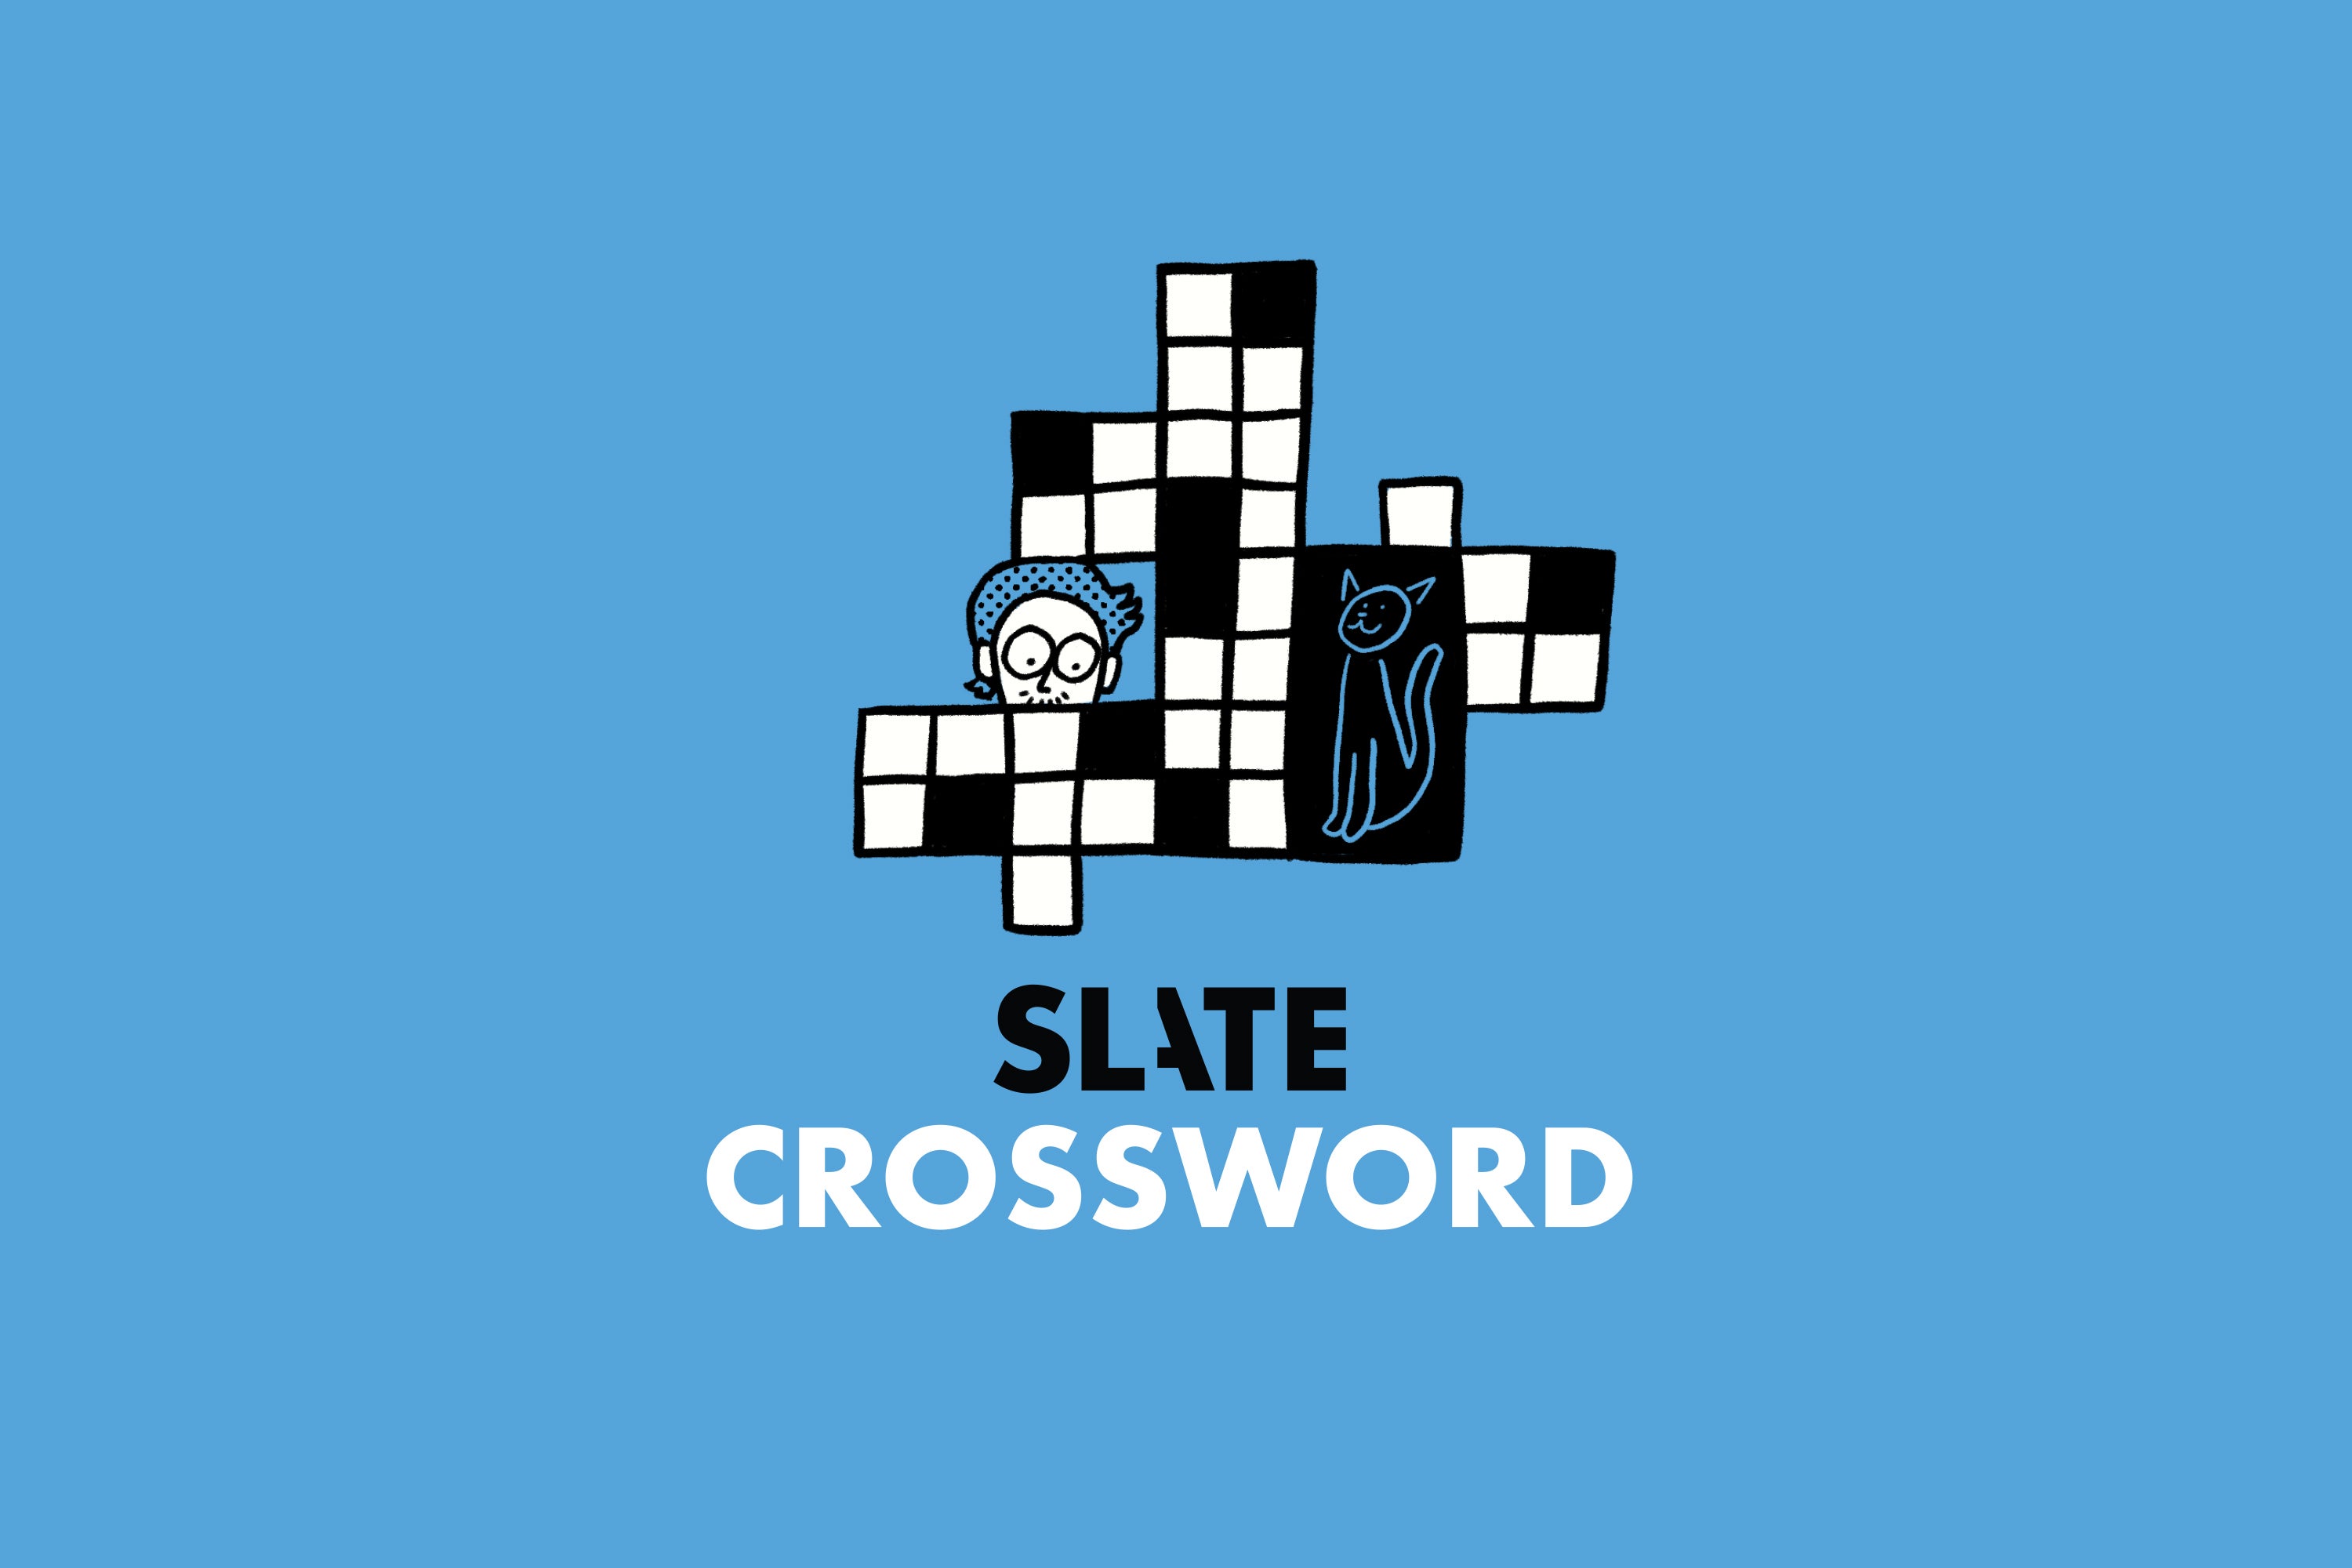 Slate Crossword: Site of Rock-and-Roll Hits? (Seven Letters)